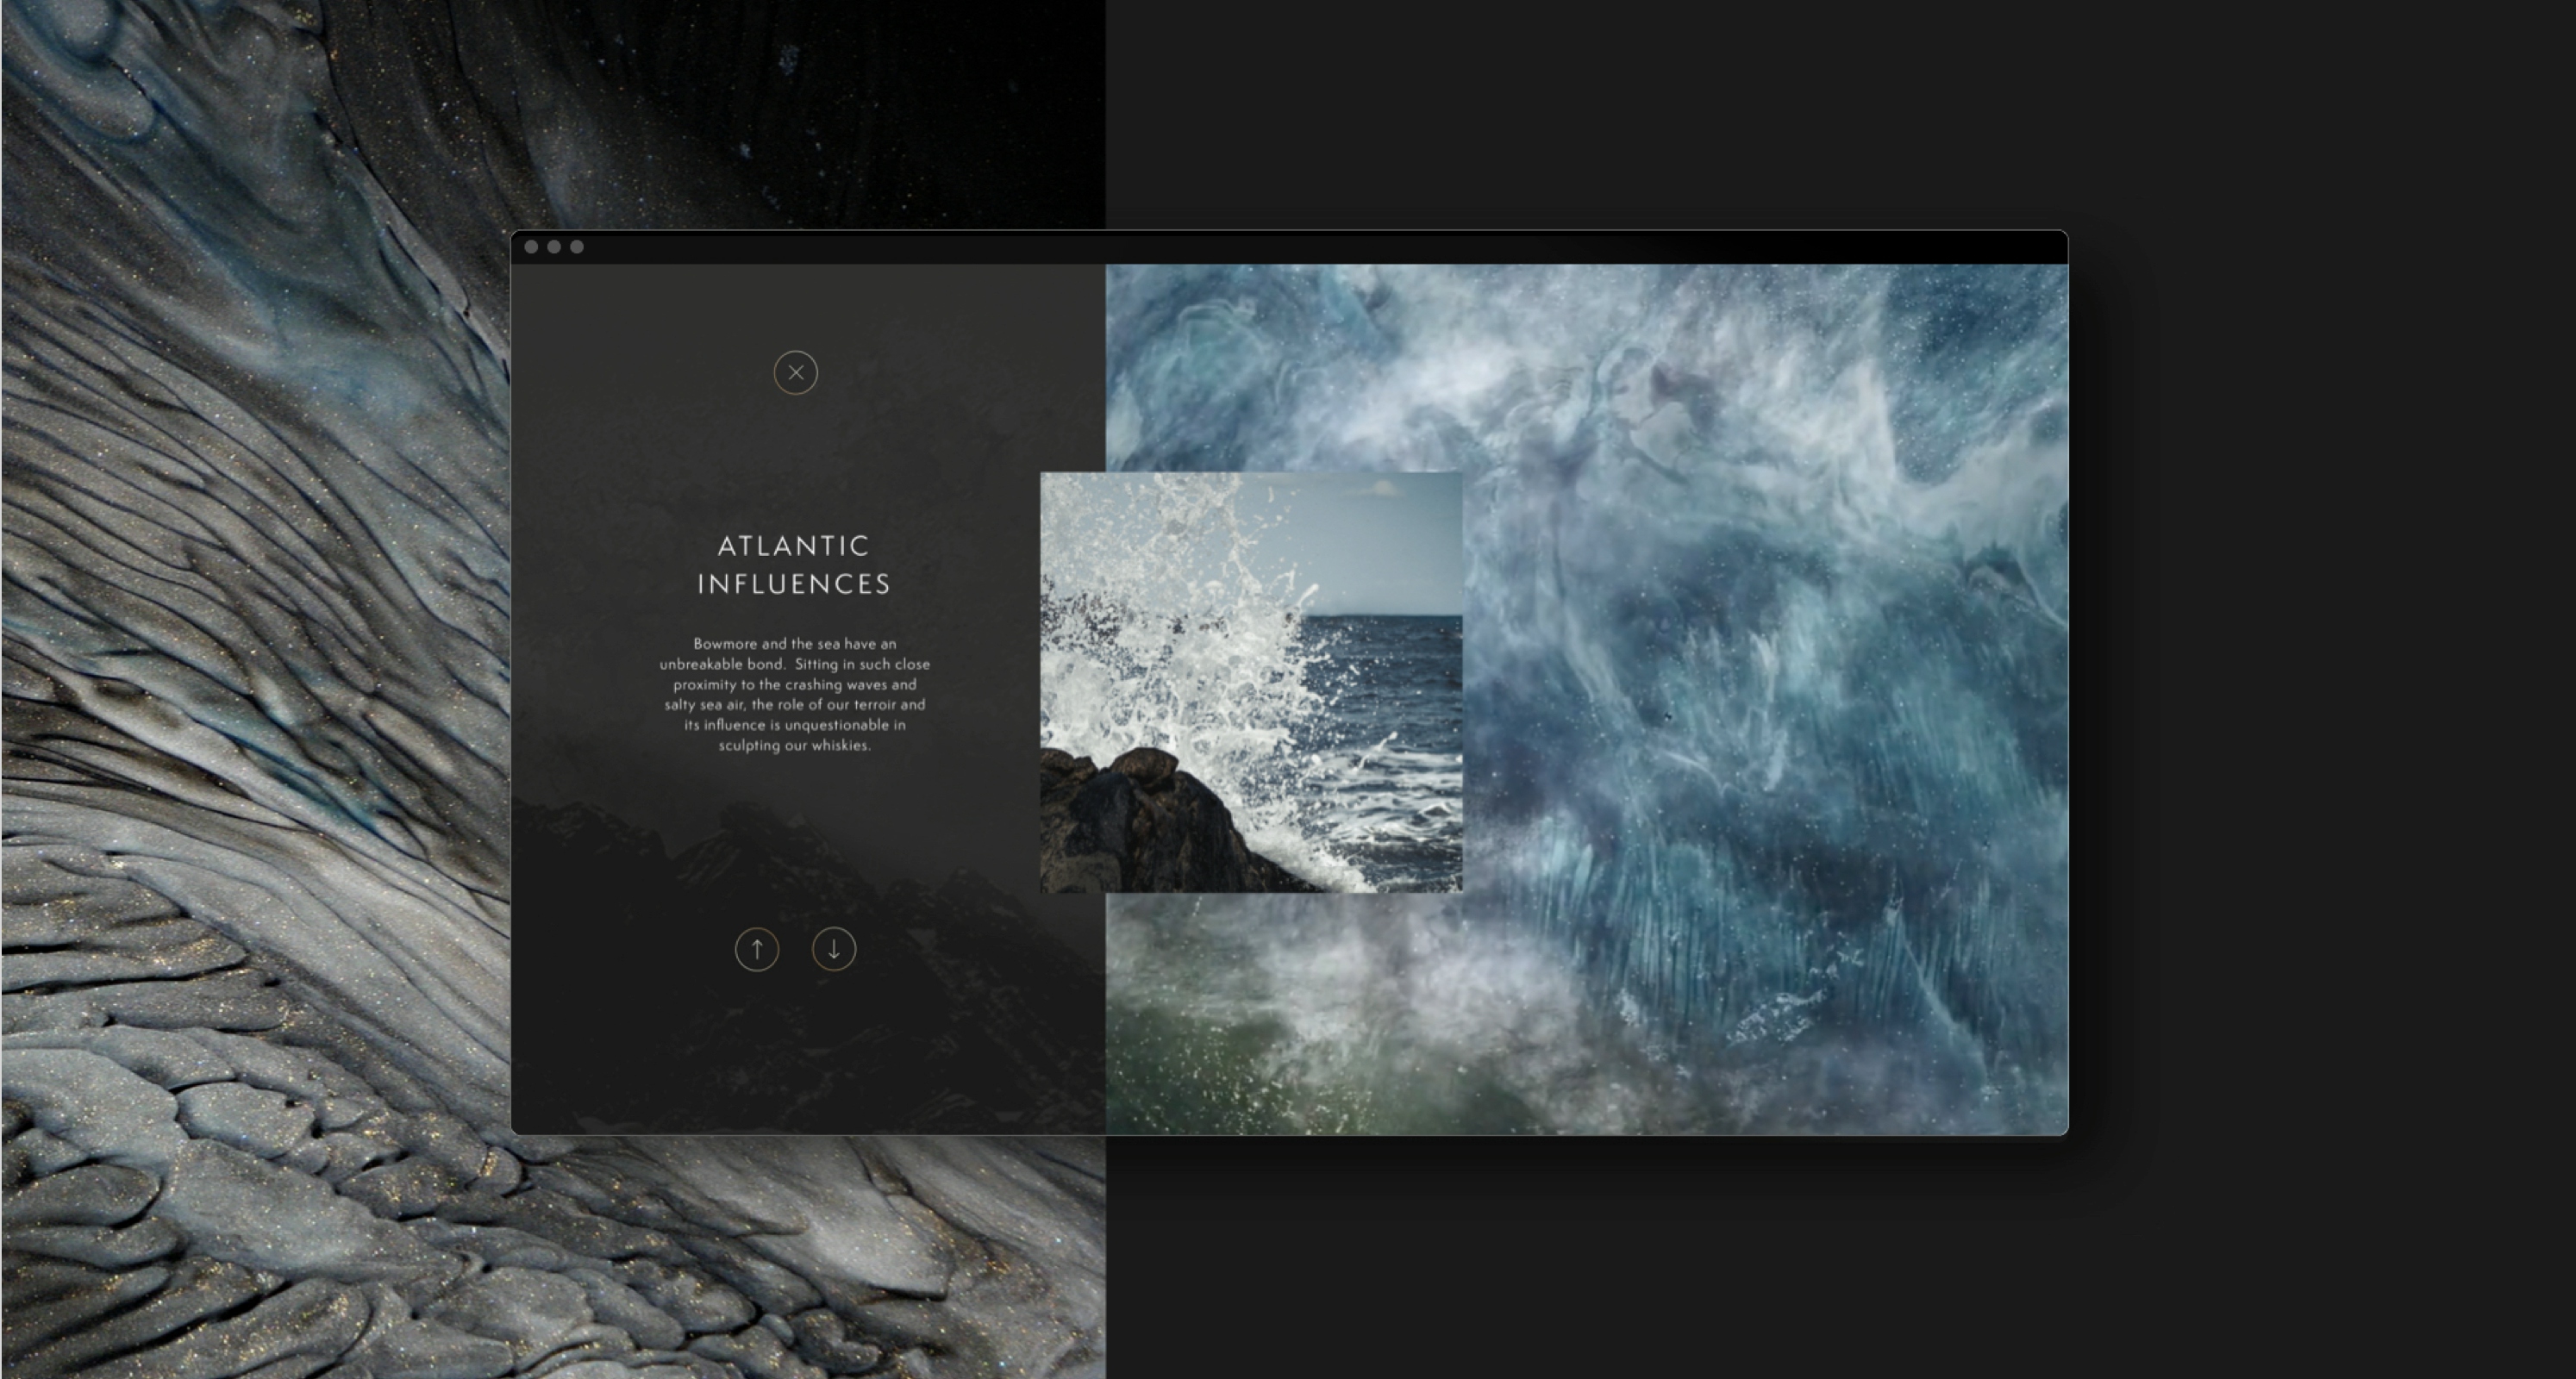 Screenshot for timeless with images of waves and text “Atlantic influences” to depict the link between whisky and the sea